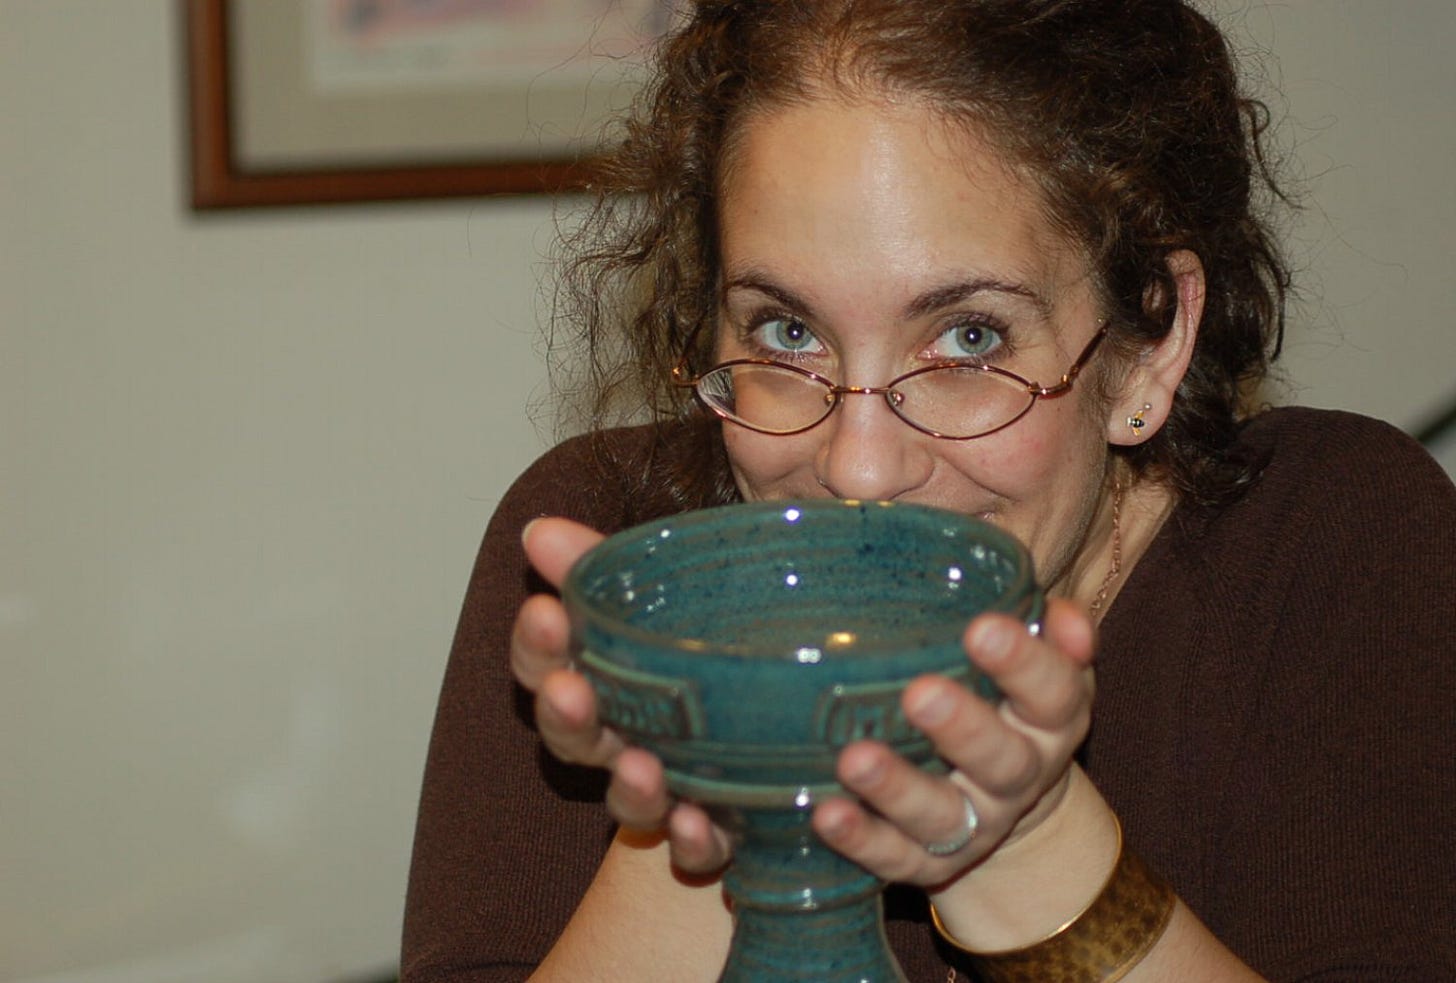 That's me looking really excited about my custom "prophets' cup" for Passover!